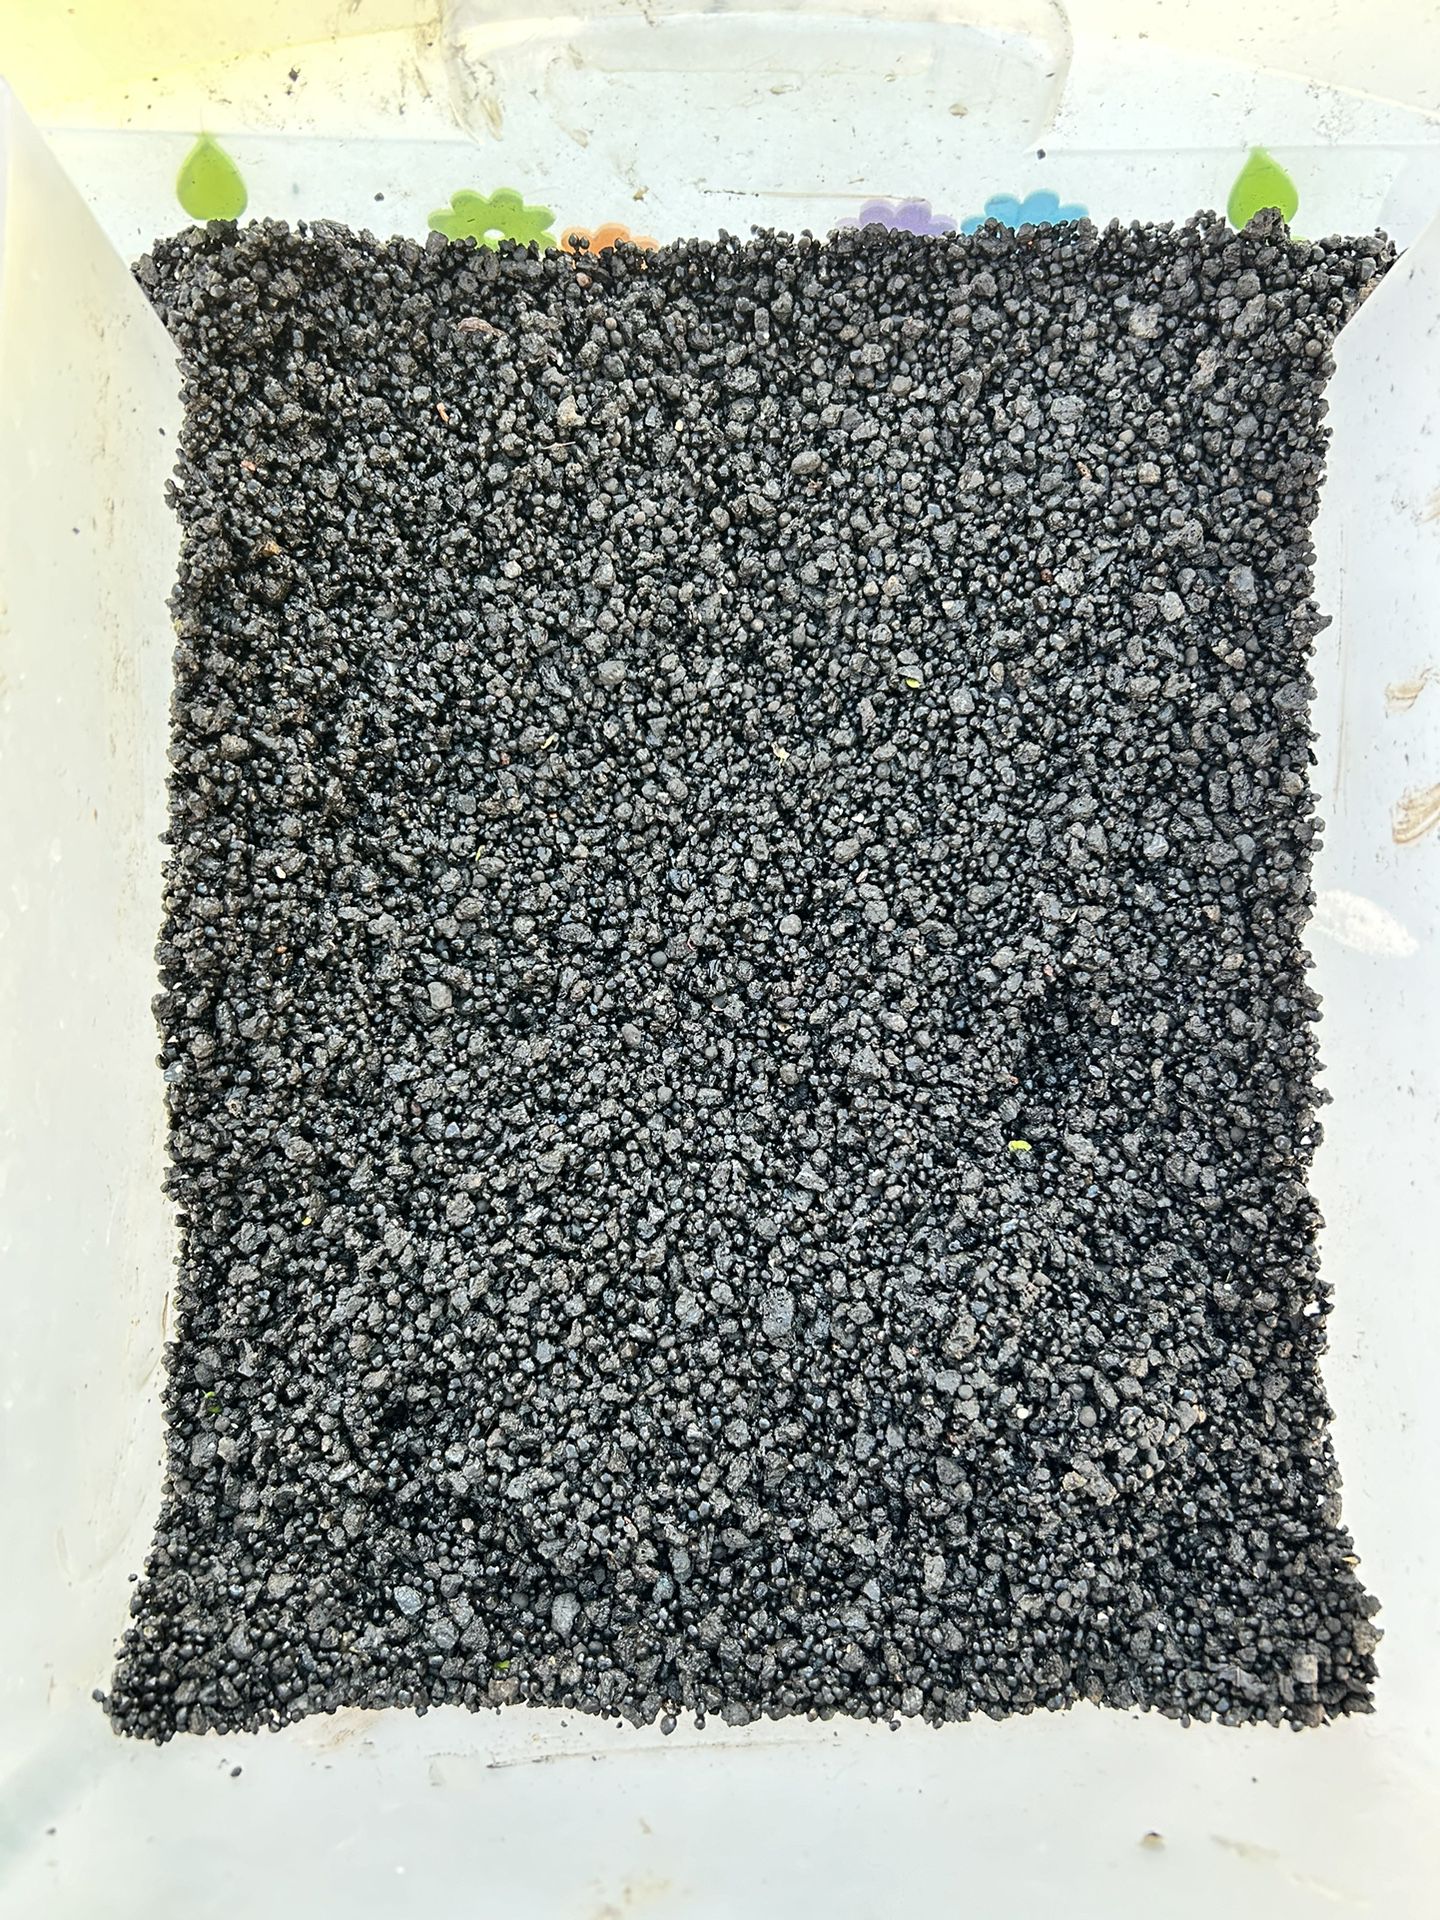 Lava Rock Mix Fluval Stratum Substrate / Fish Tank Substrate 